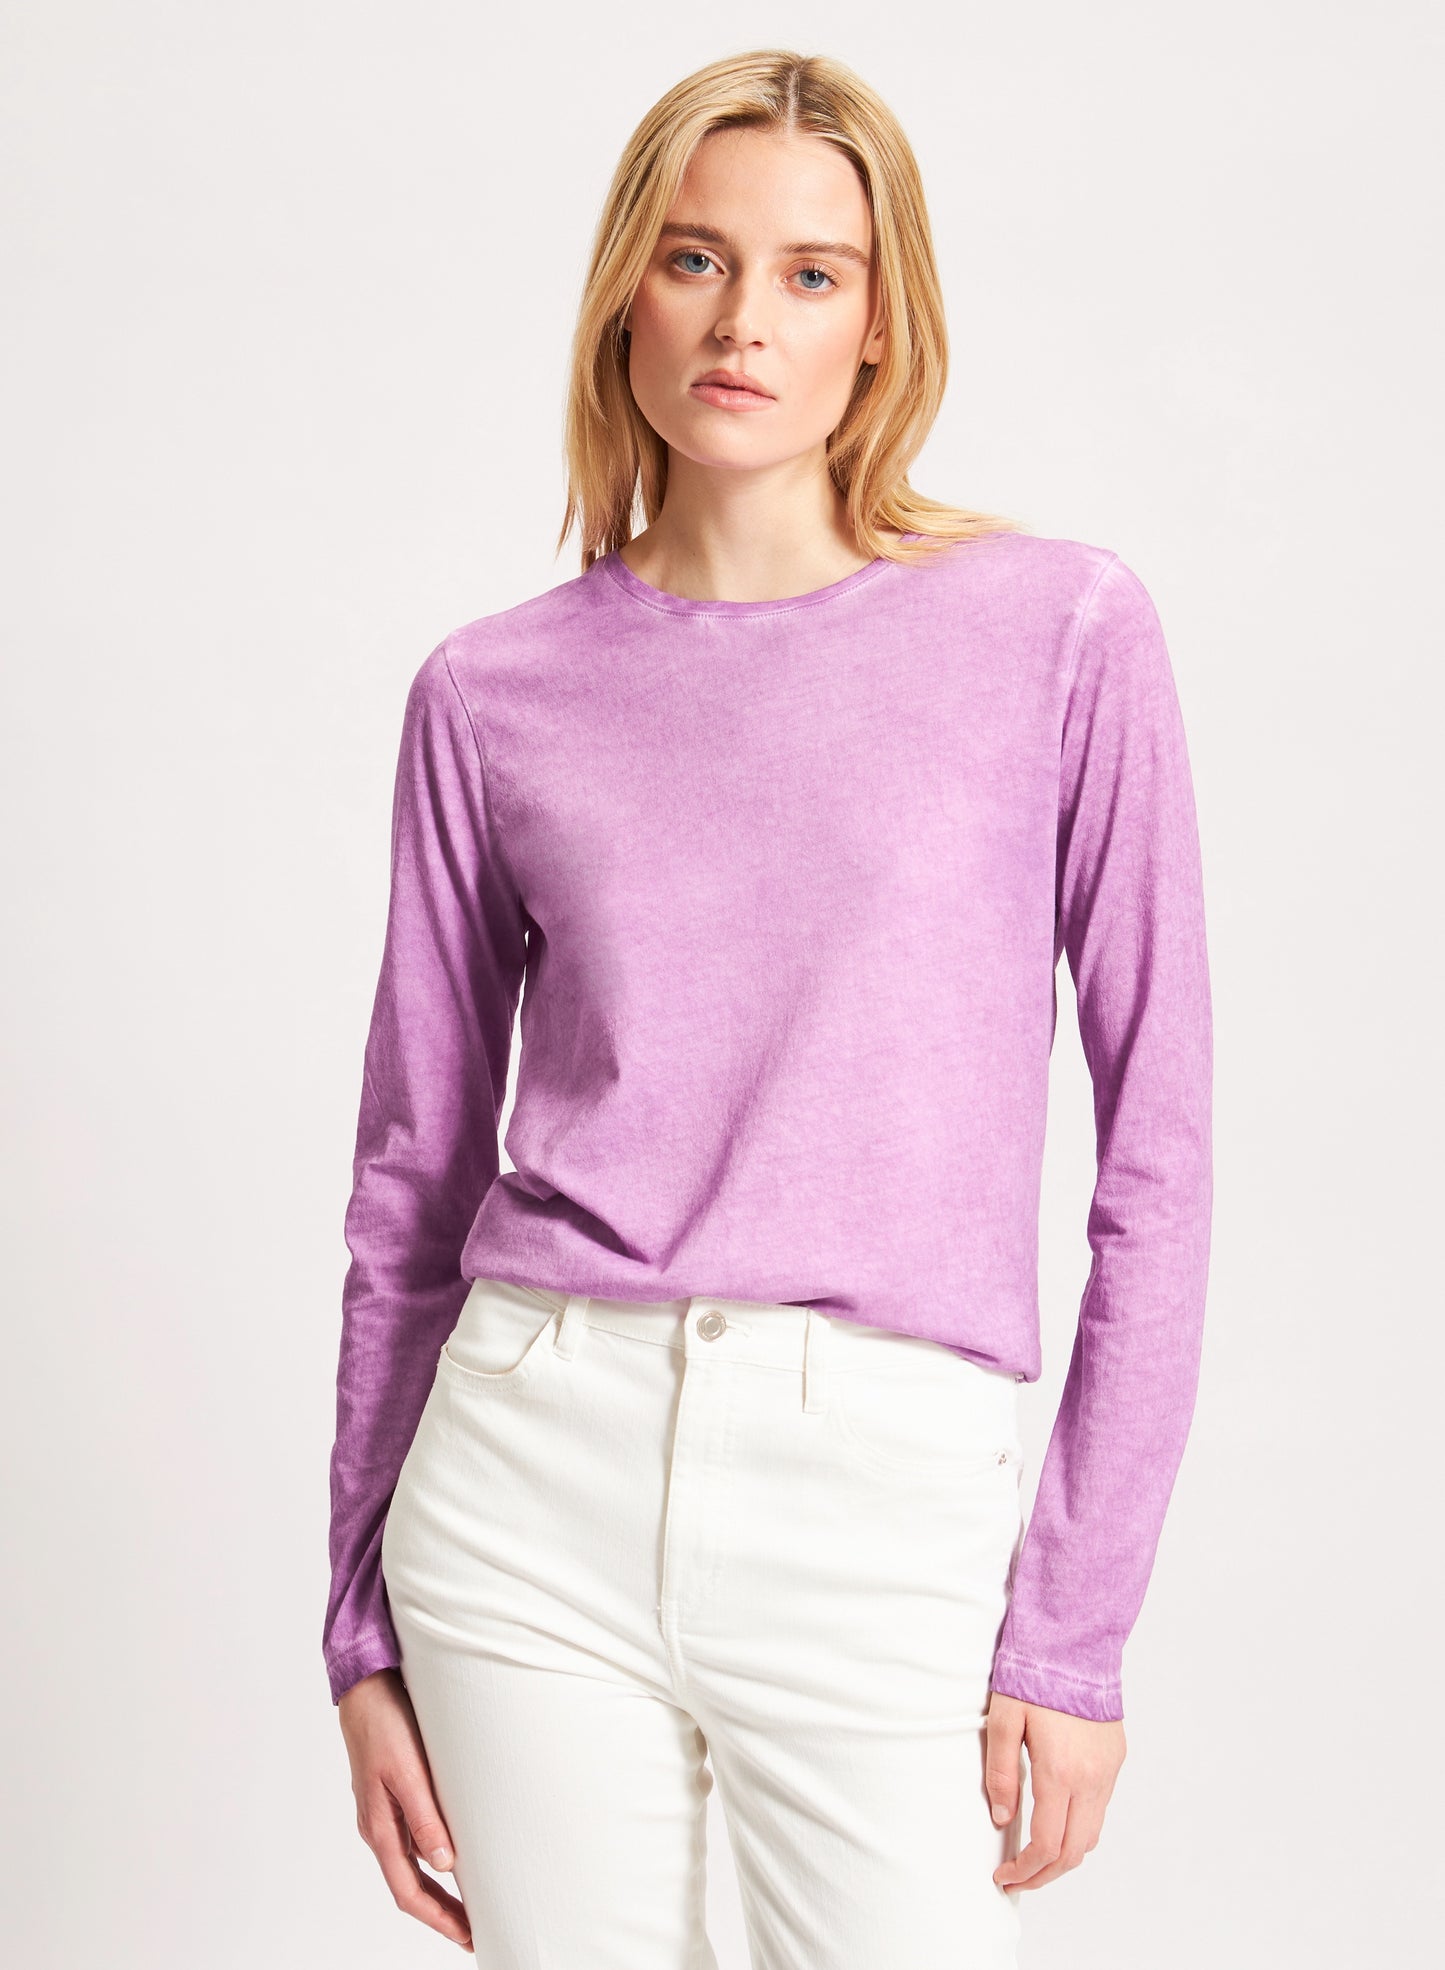 Patrick Assaraf Sublime Classic Crew Long Sleeve Tee in Thistle